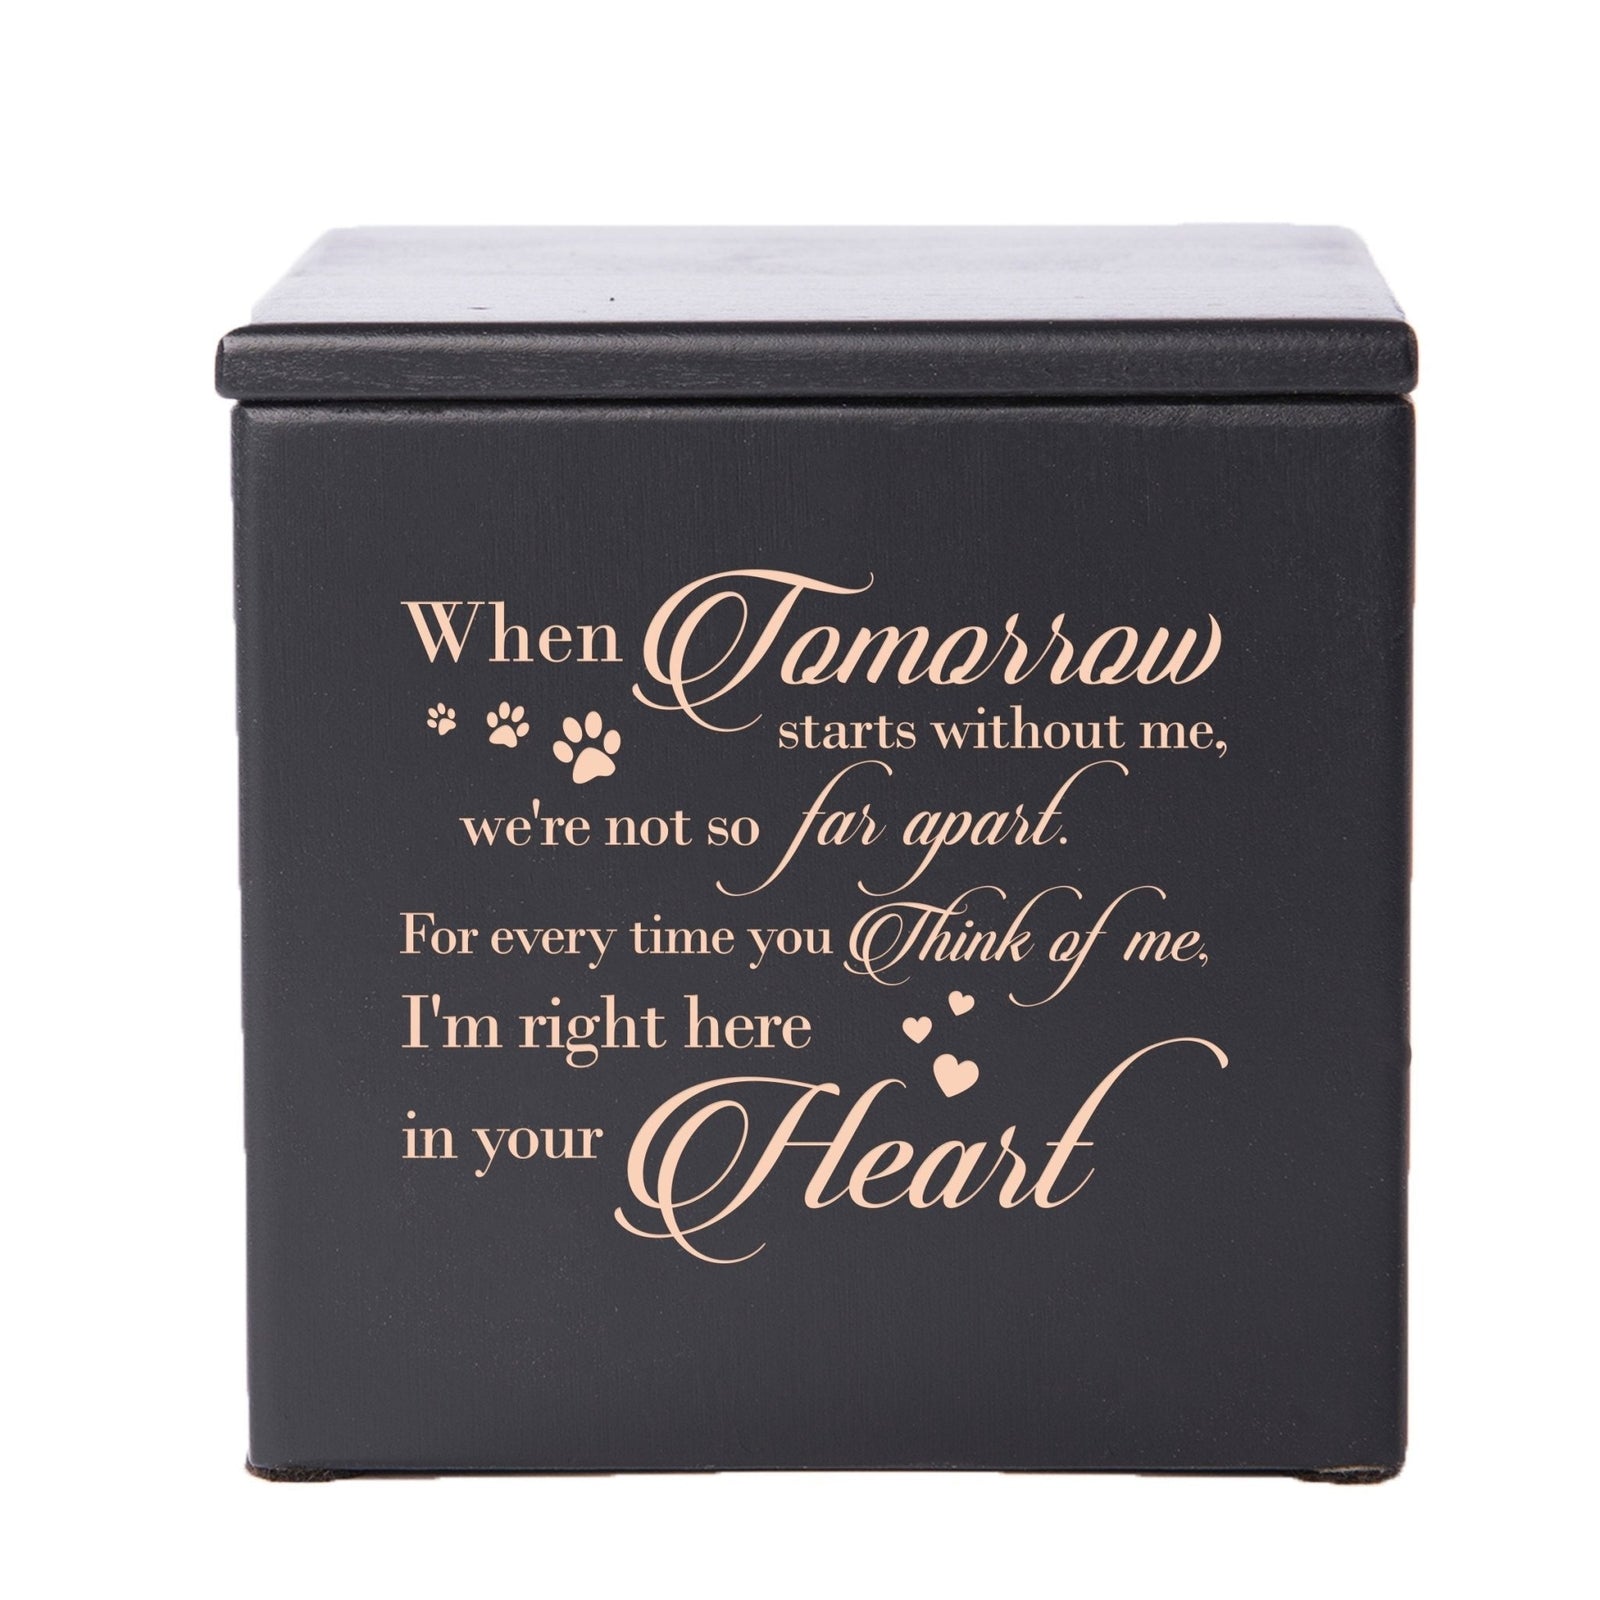 Pet Memorial Keepsake Cremation Urn Box for Dog or Cat - When Tomorrow Starts Without Me - LifeSong Milestones